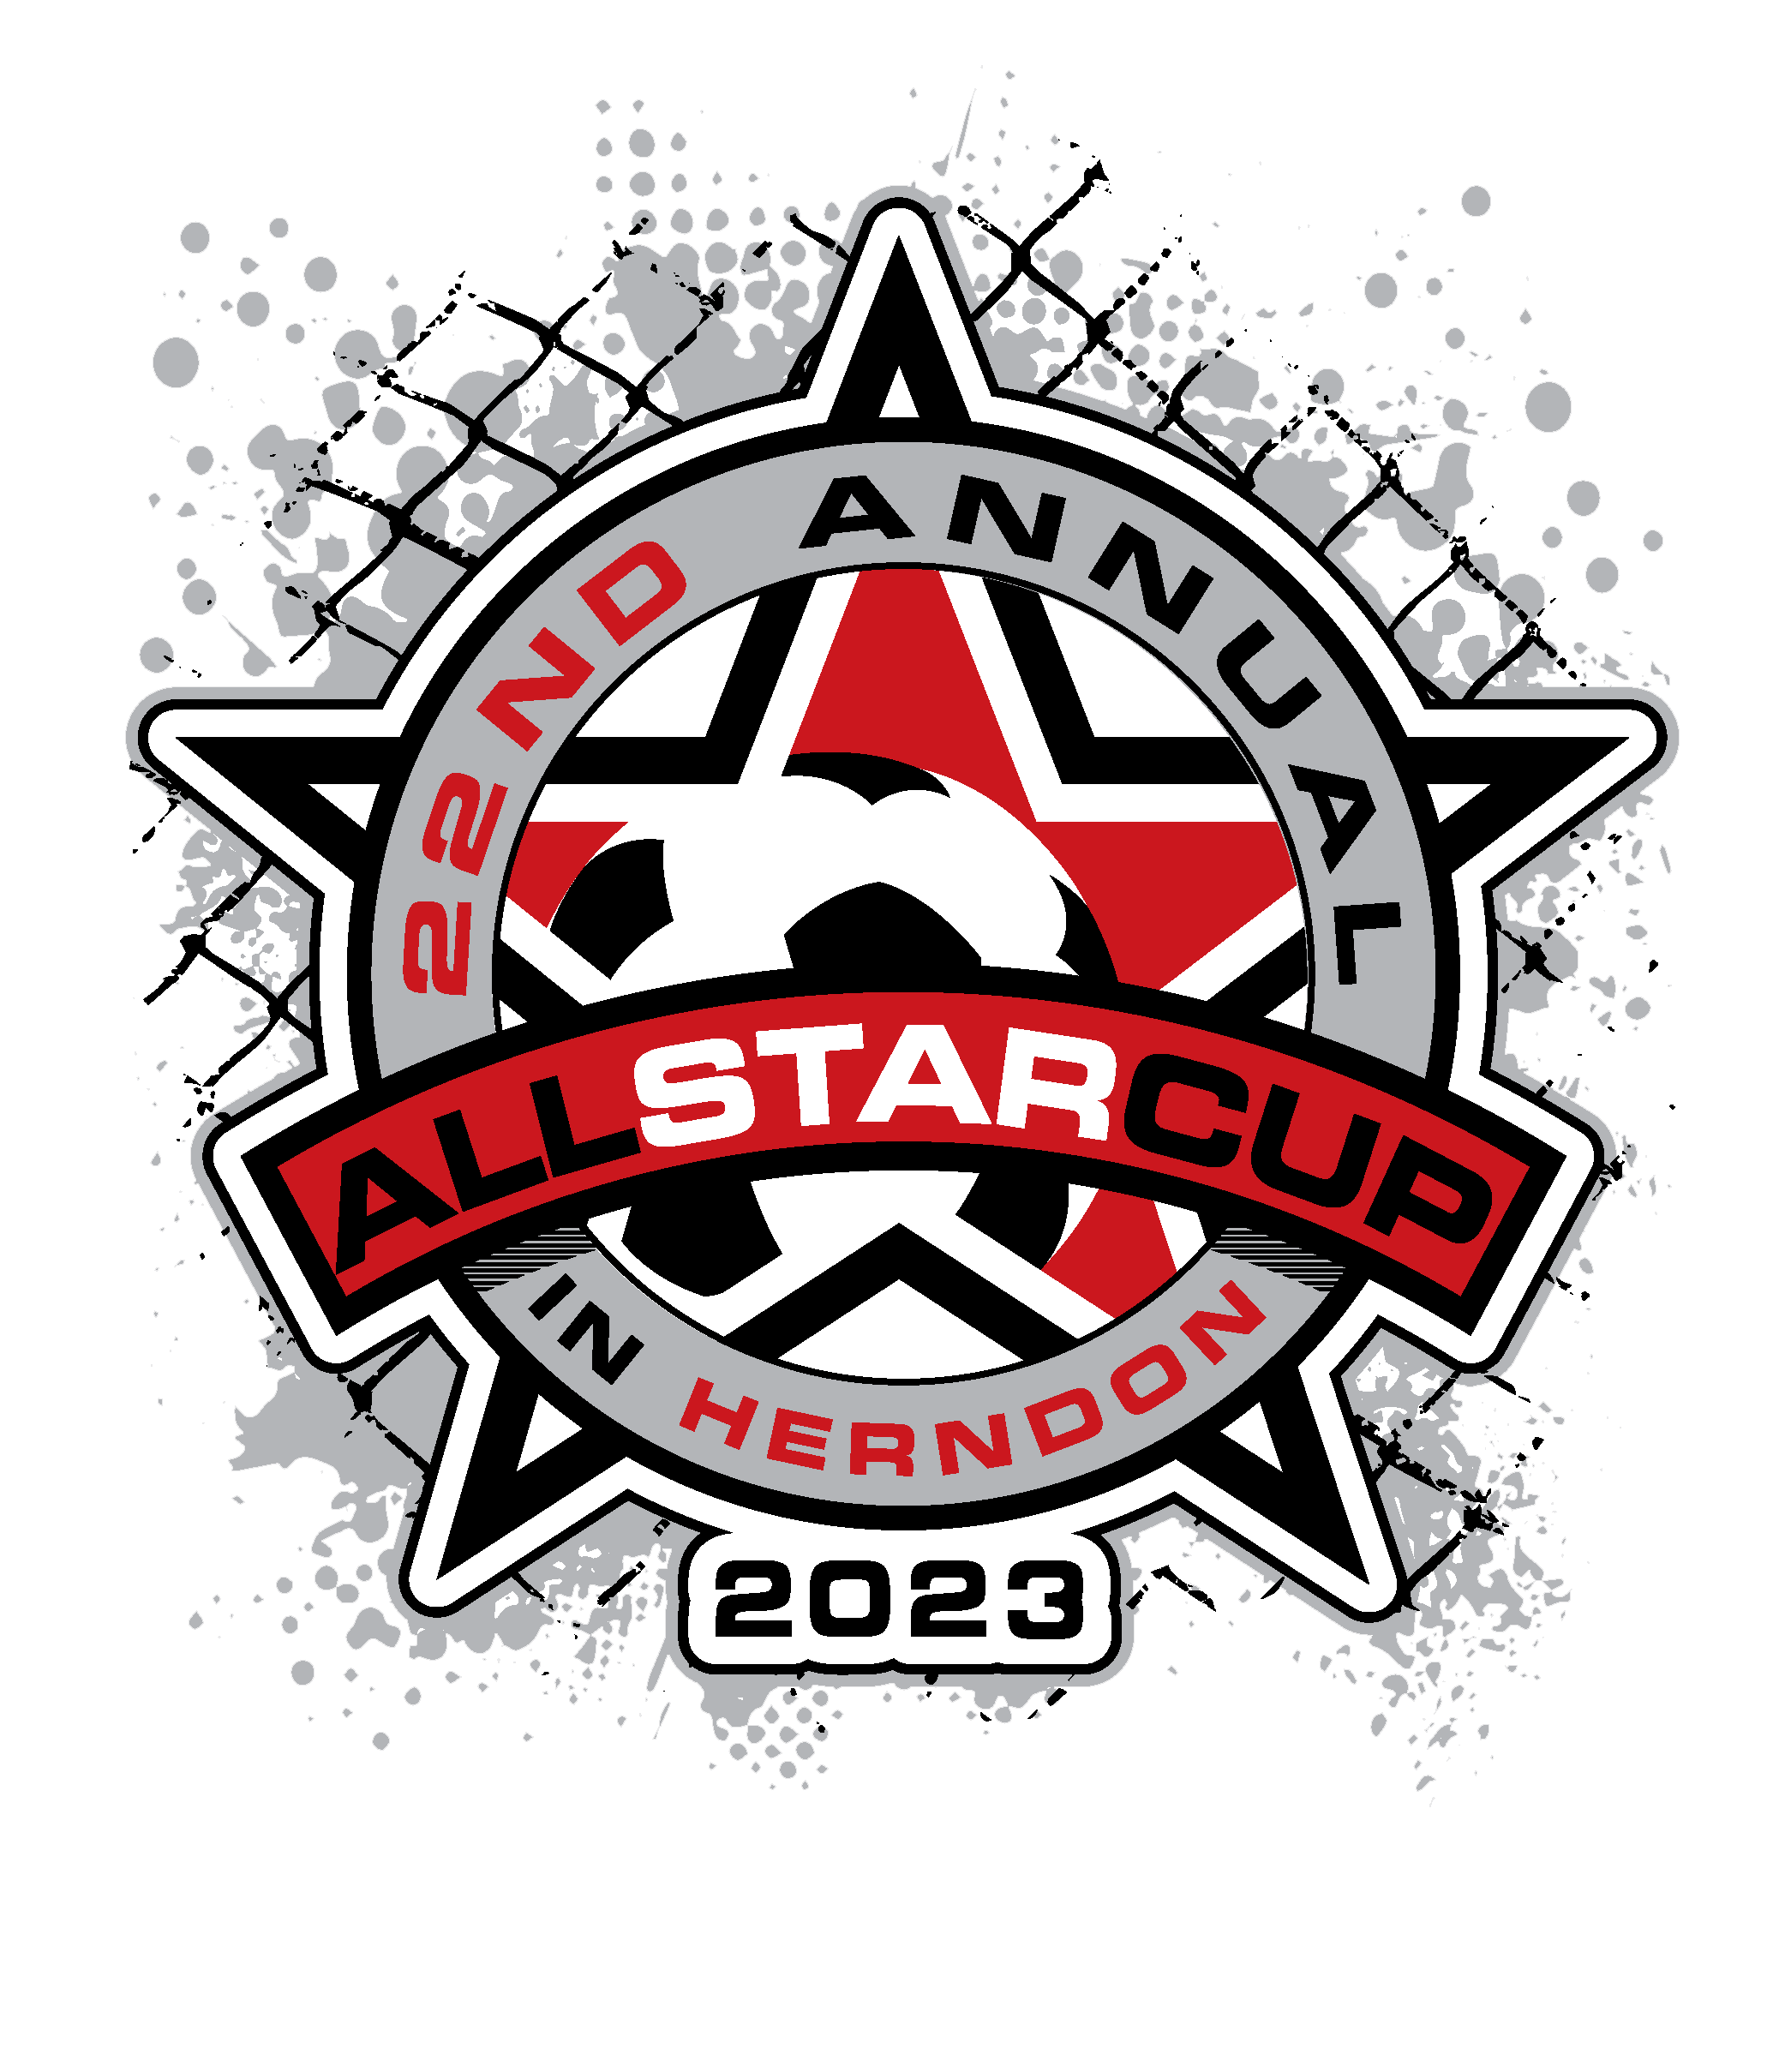 All Star Cup Logo